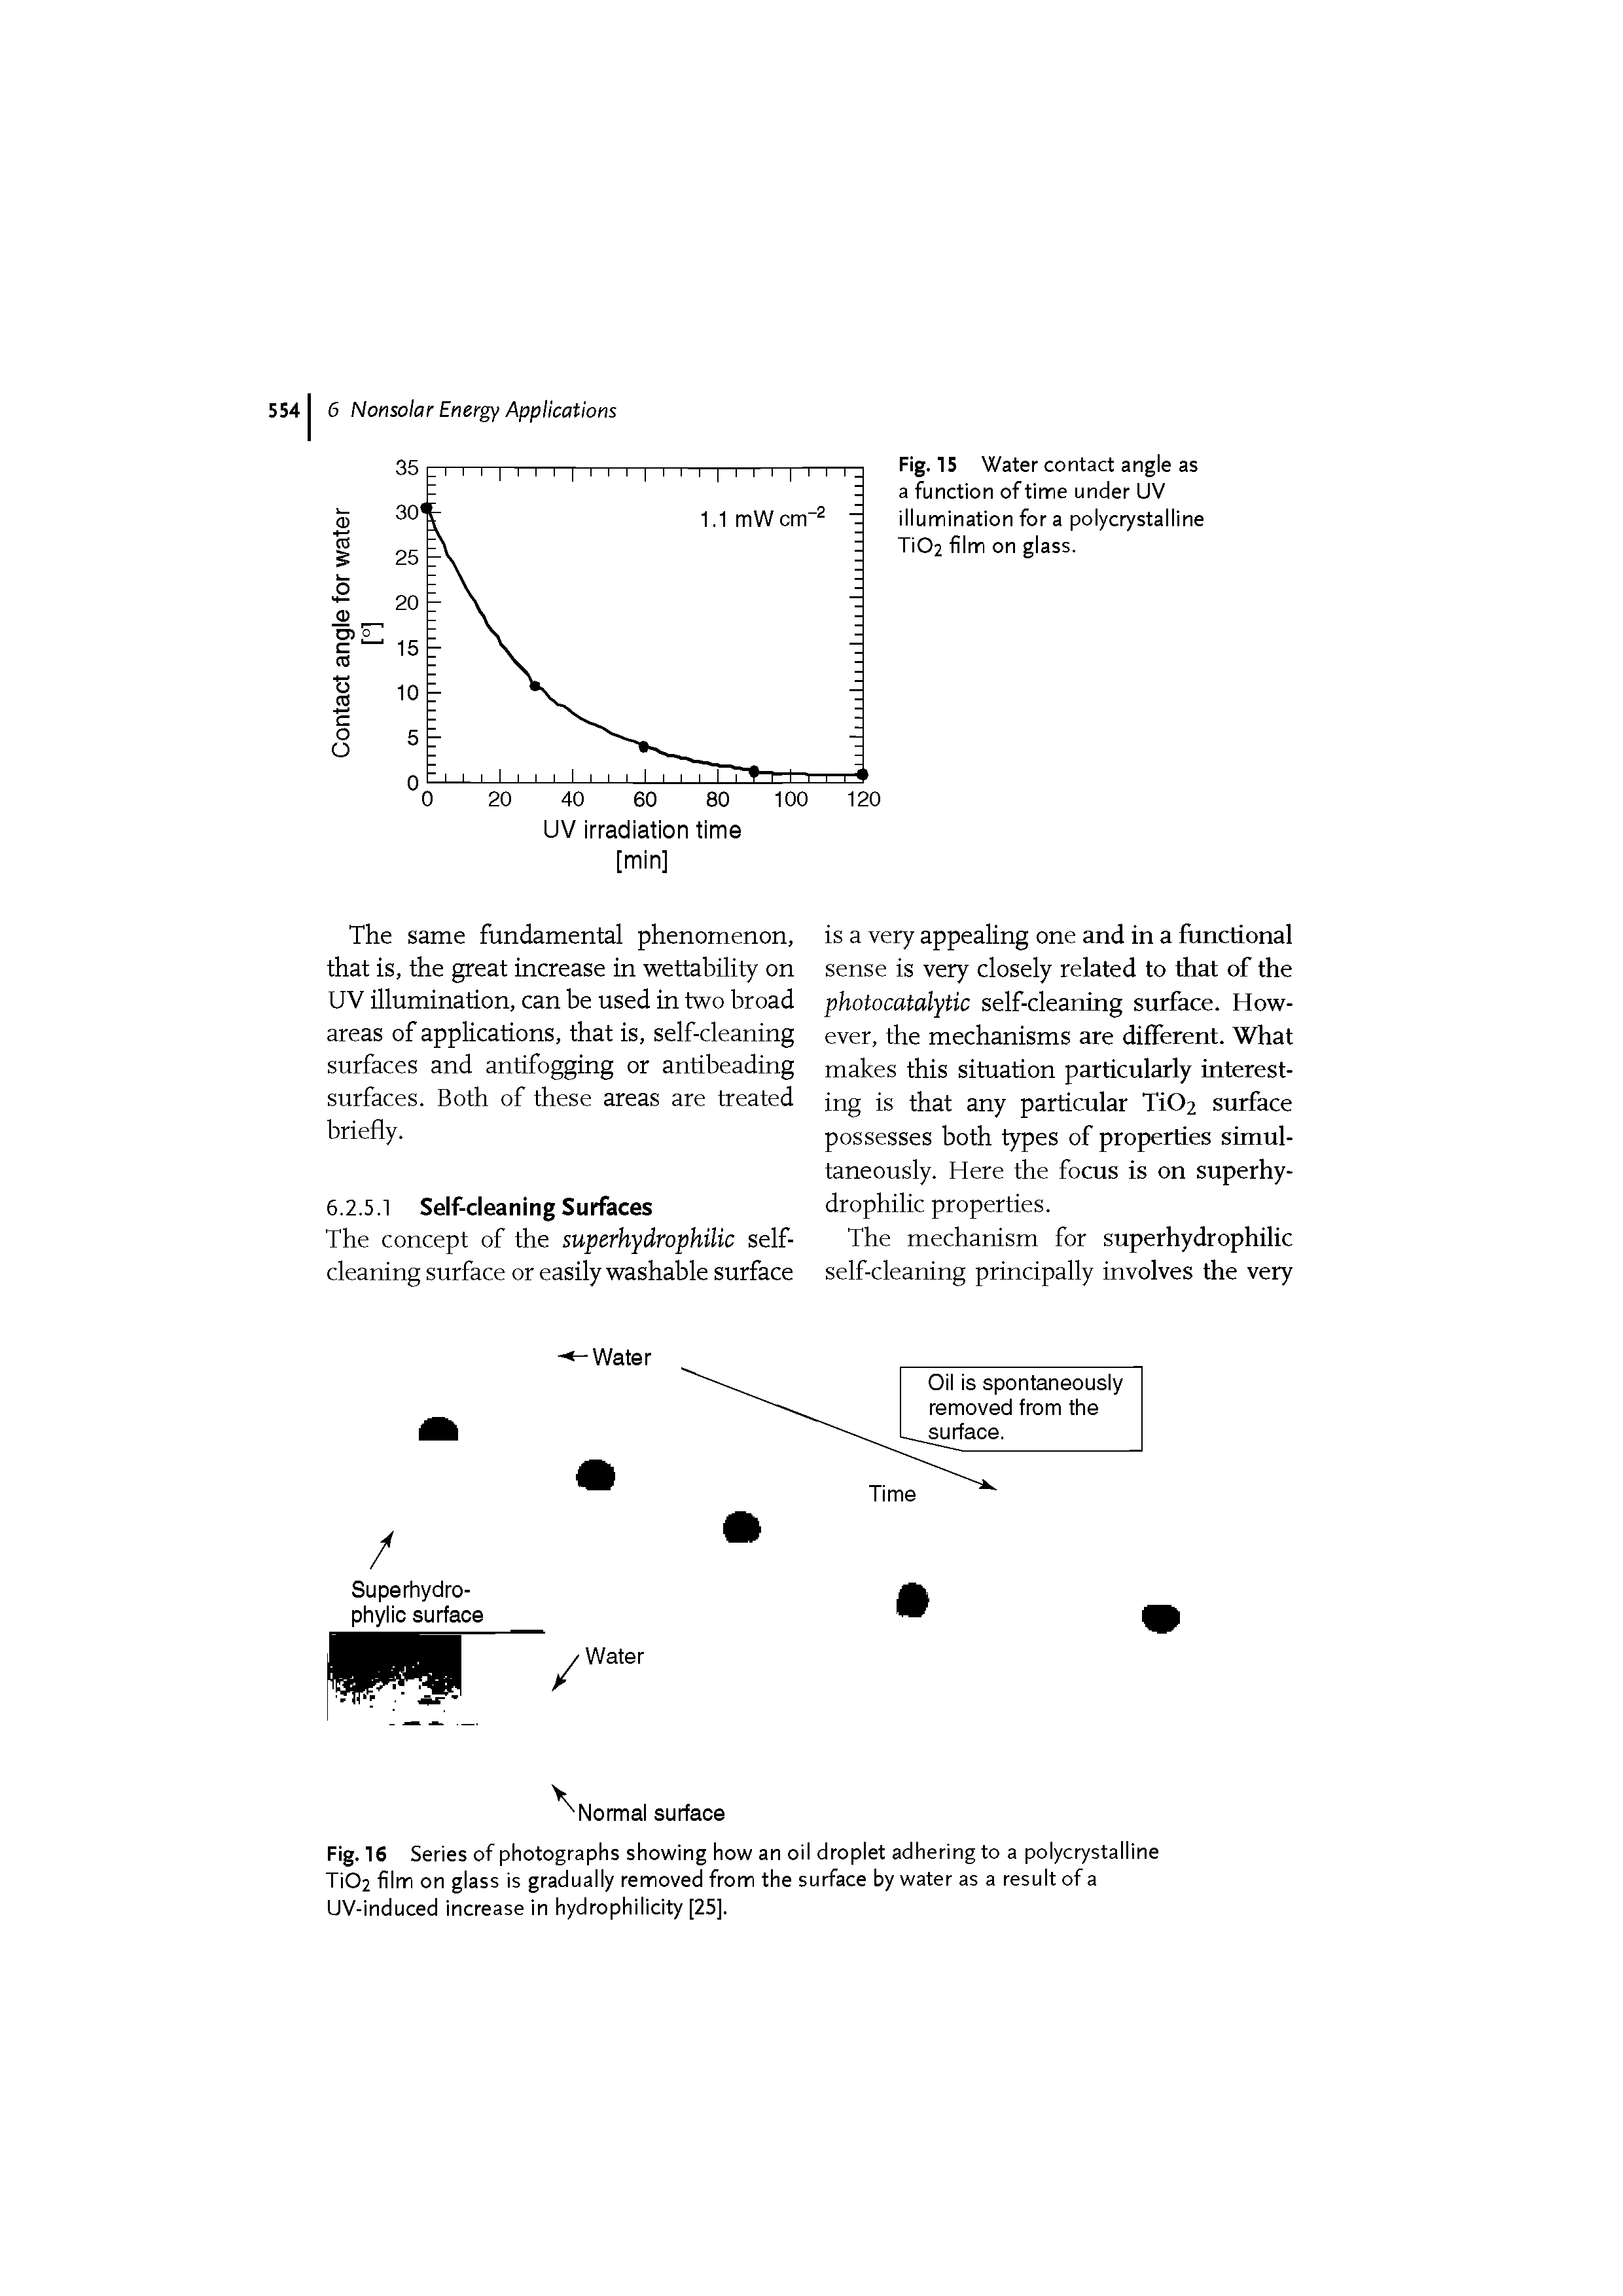 Fig. 15 Water contact angle as a function of time under UV illumination for a polycrystalline Ti02 film on glass.